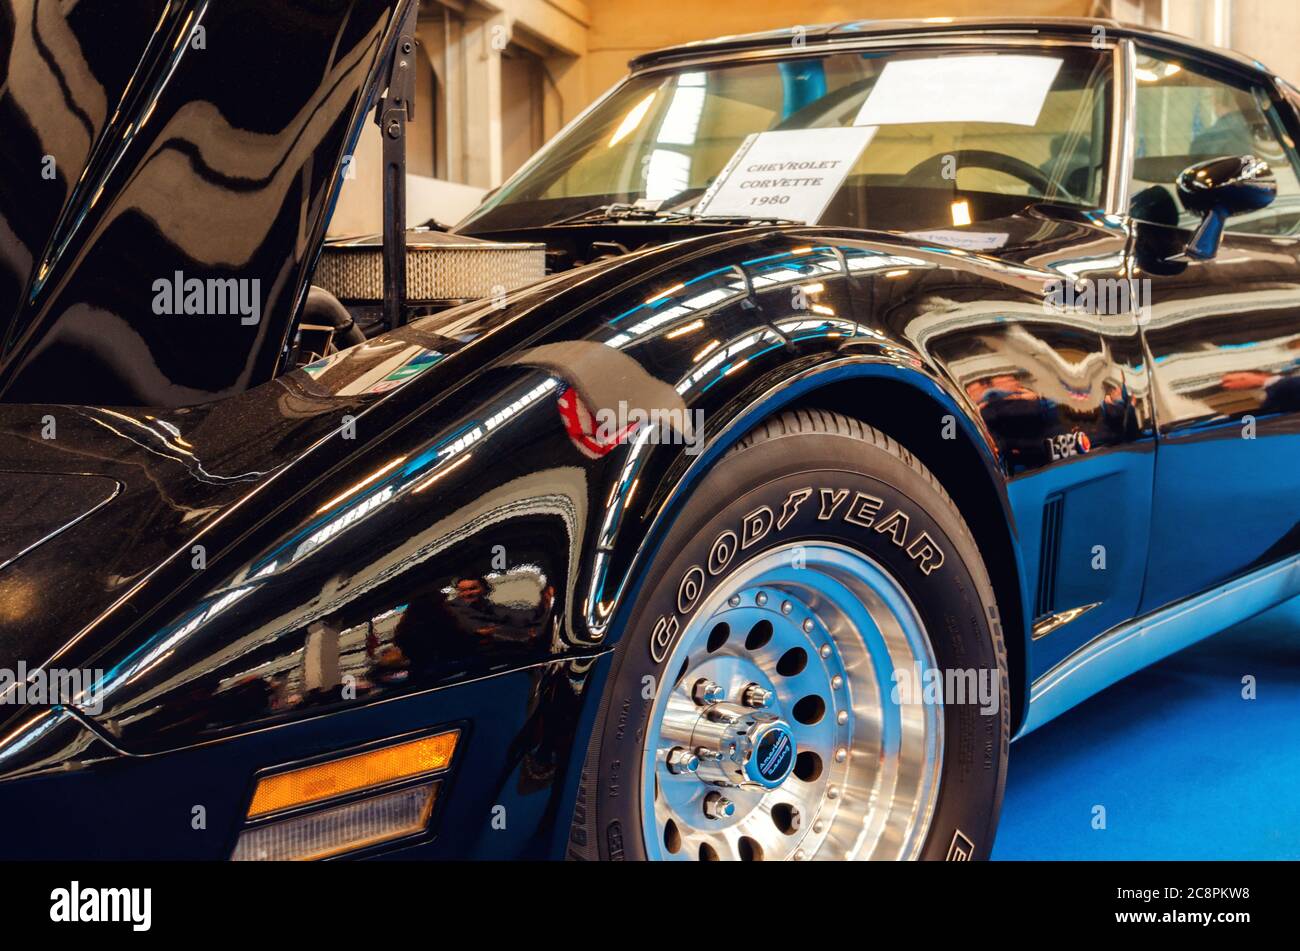 TURIN, ITALY - MARCH 25, 2018: black 1980 Chevrolet Corvette L-82 on a classic american car exhibition in Turin (Italy) on march 25, 2018 Stock Photo